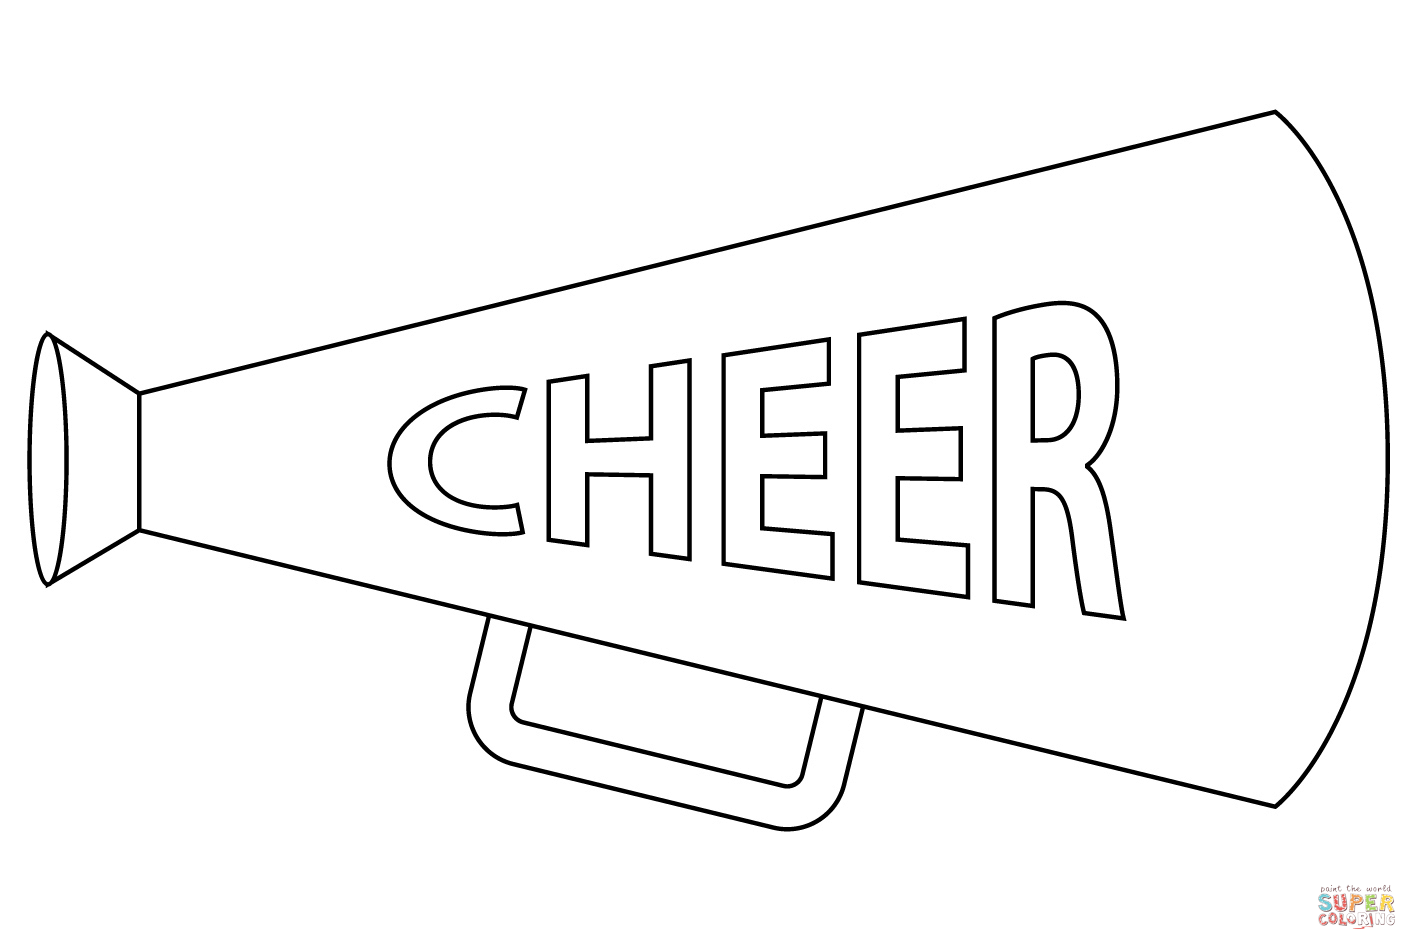 Cheer megaphone coloring page free printable coloring pages